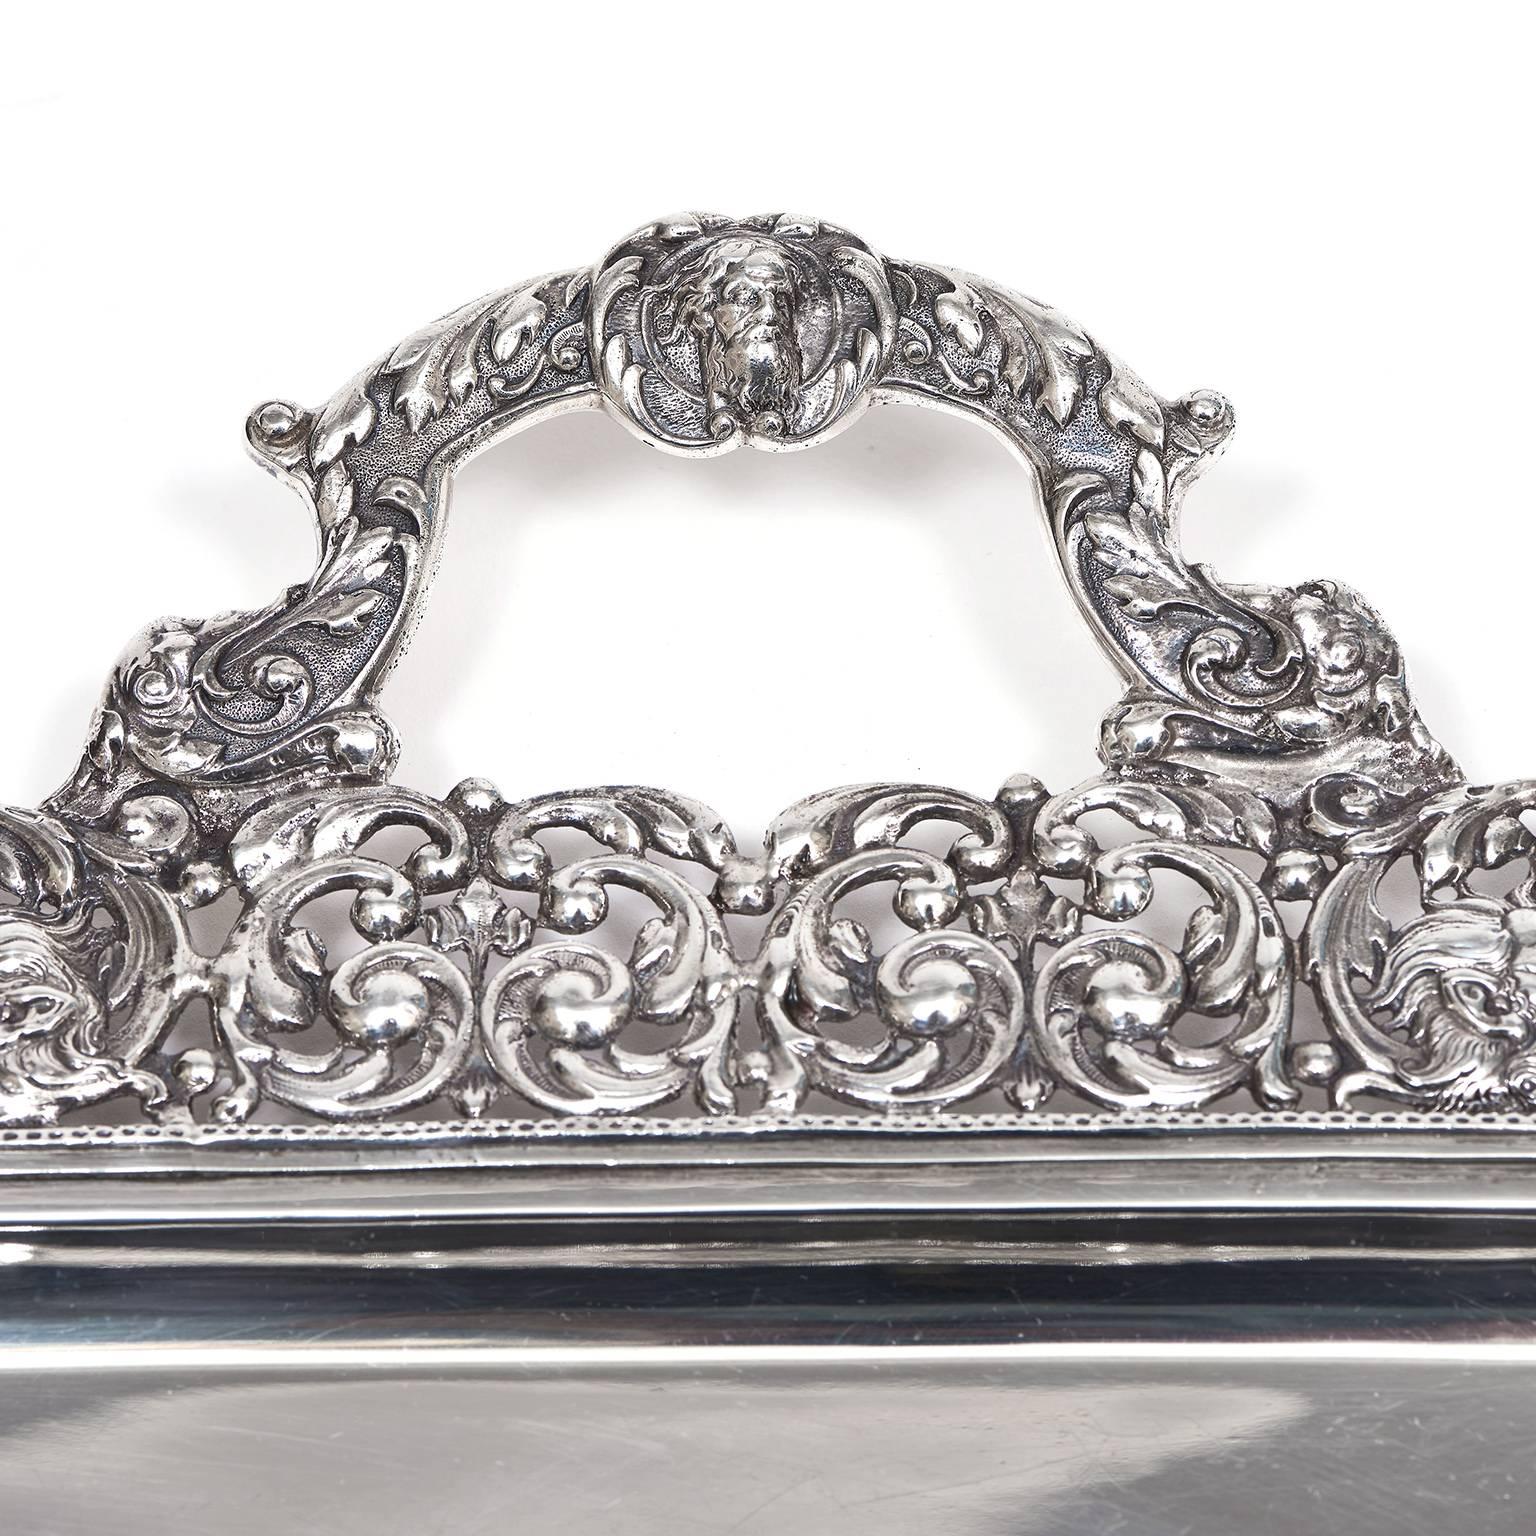 Neoclassical Revival Fabulous Rocaille Sterling Tray